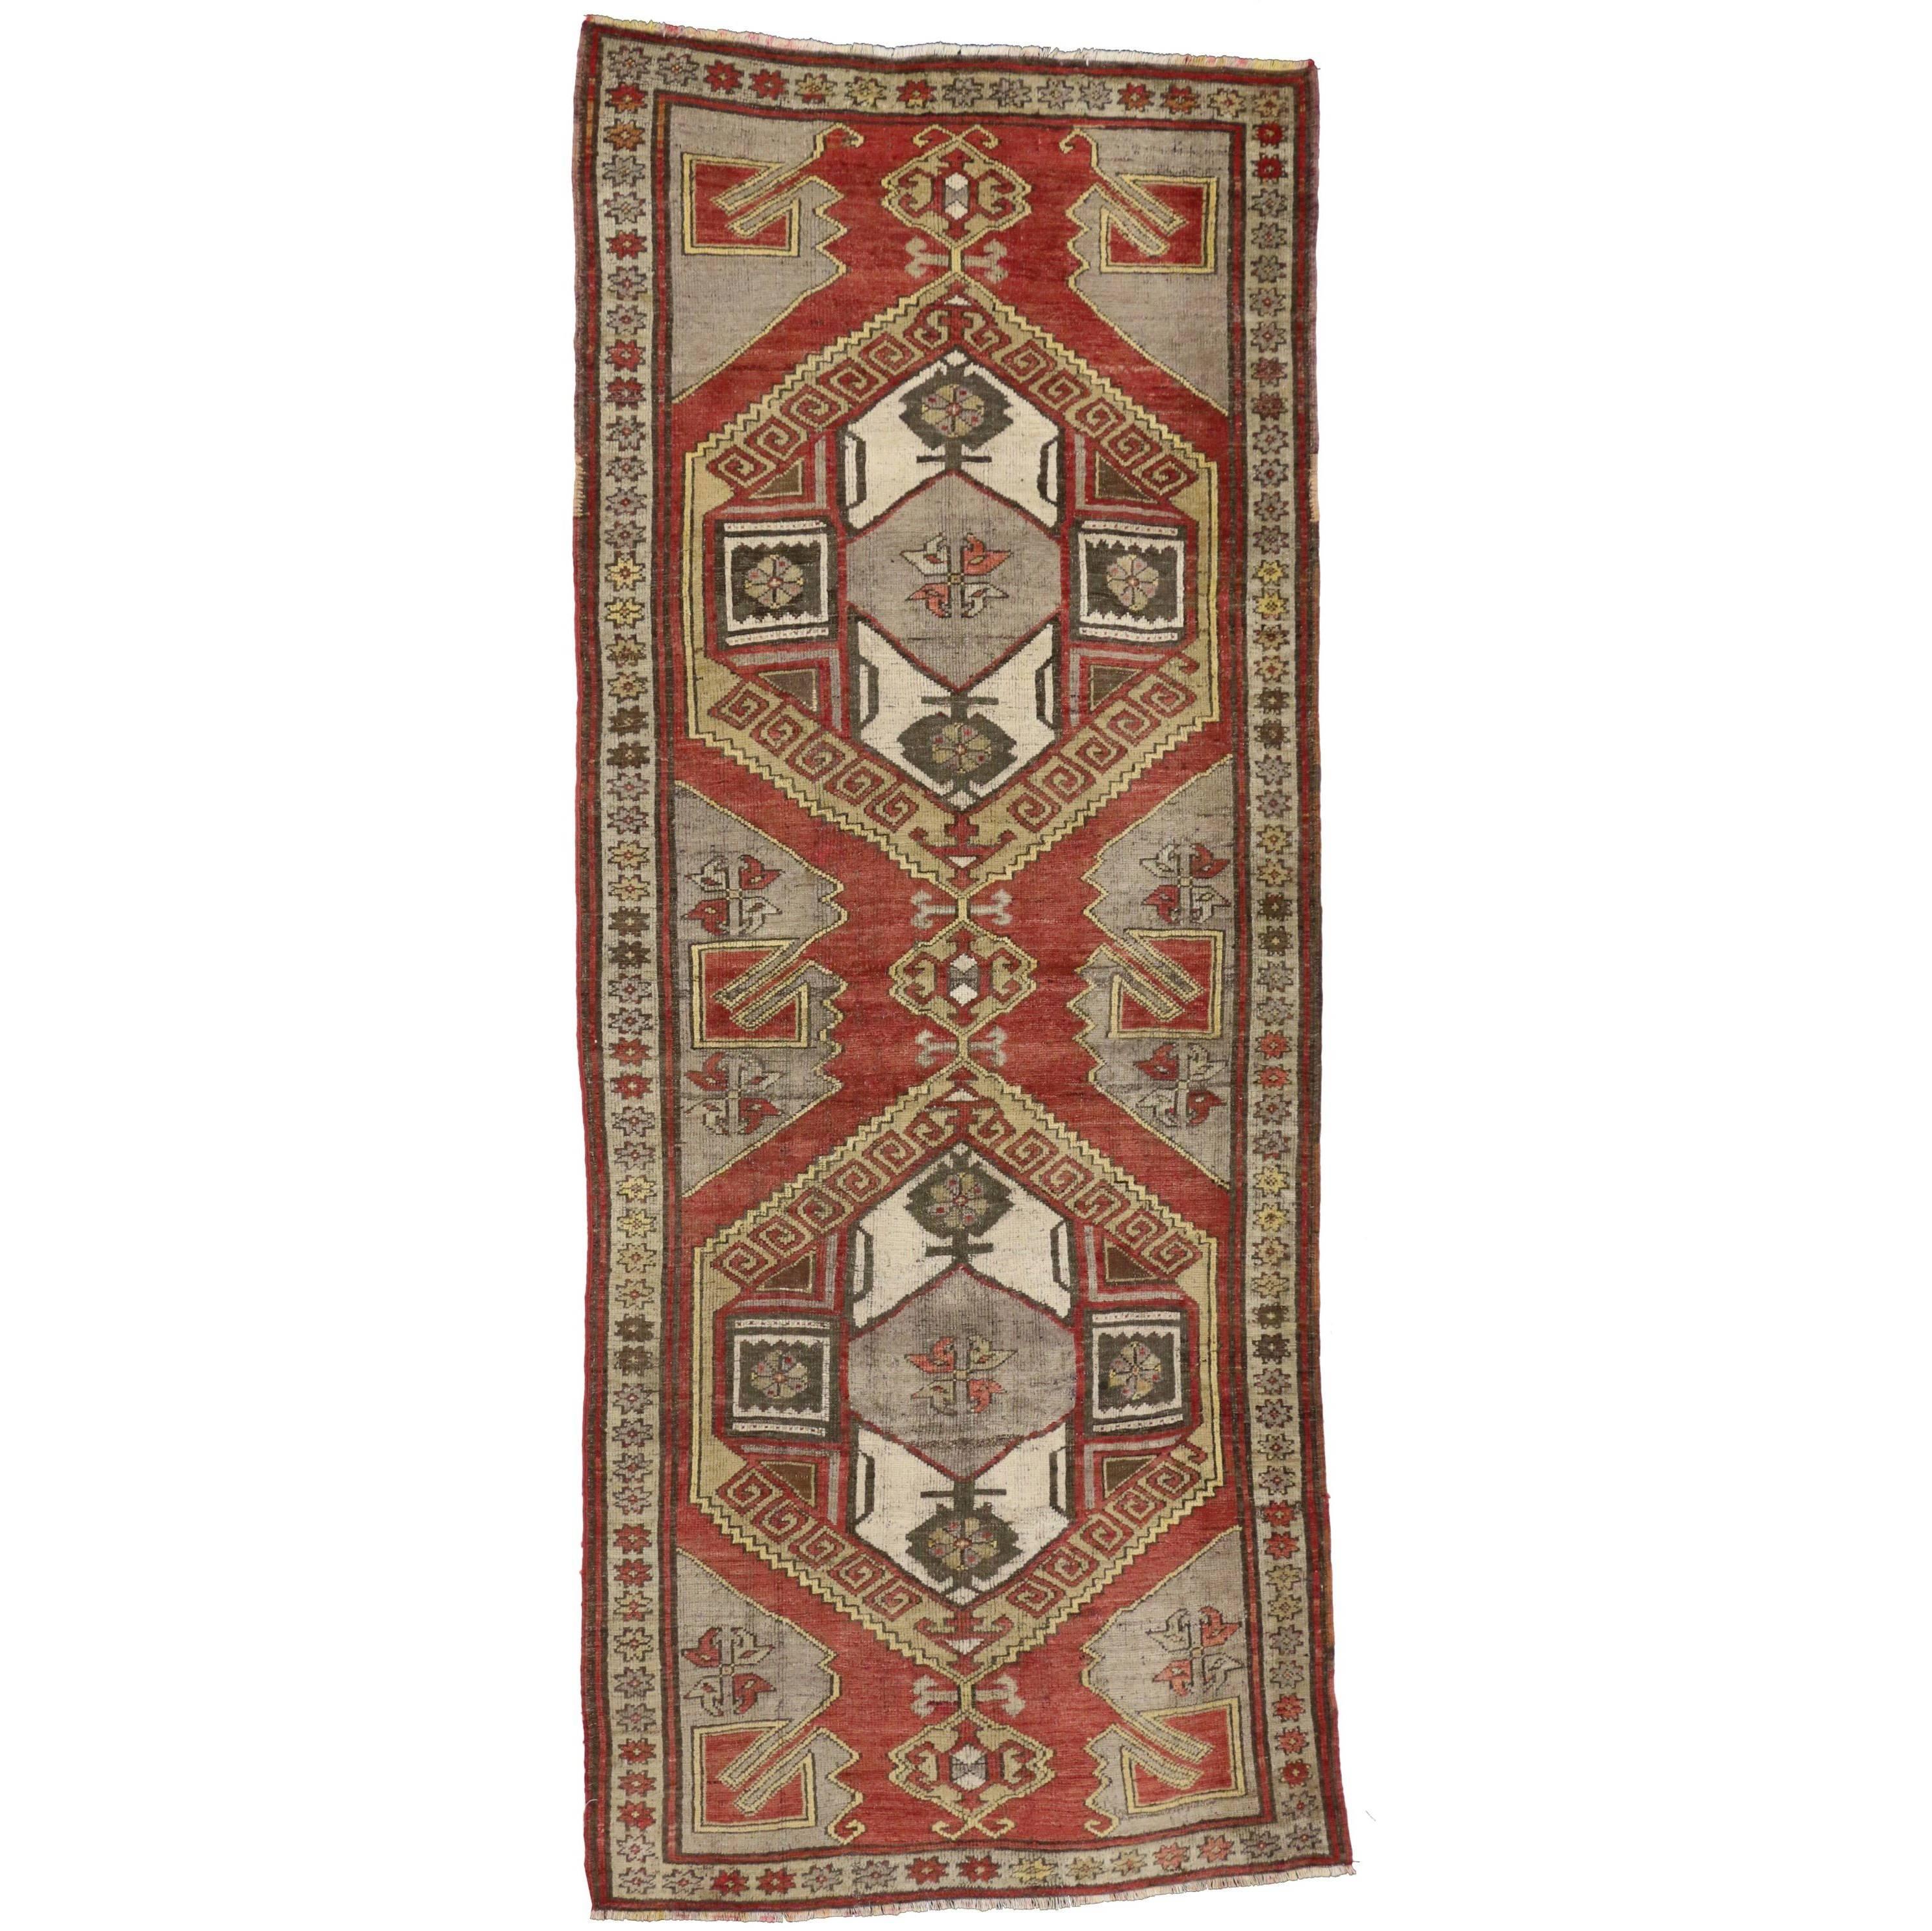 Antique Turkish Oushak Runner with Modern Tribal Style